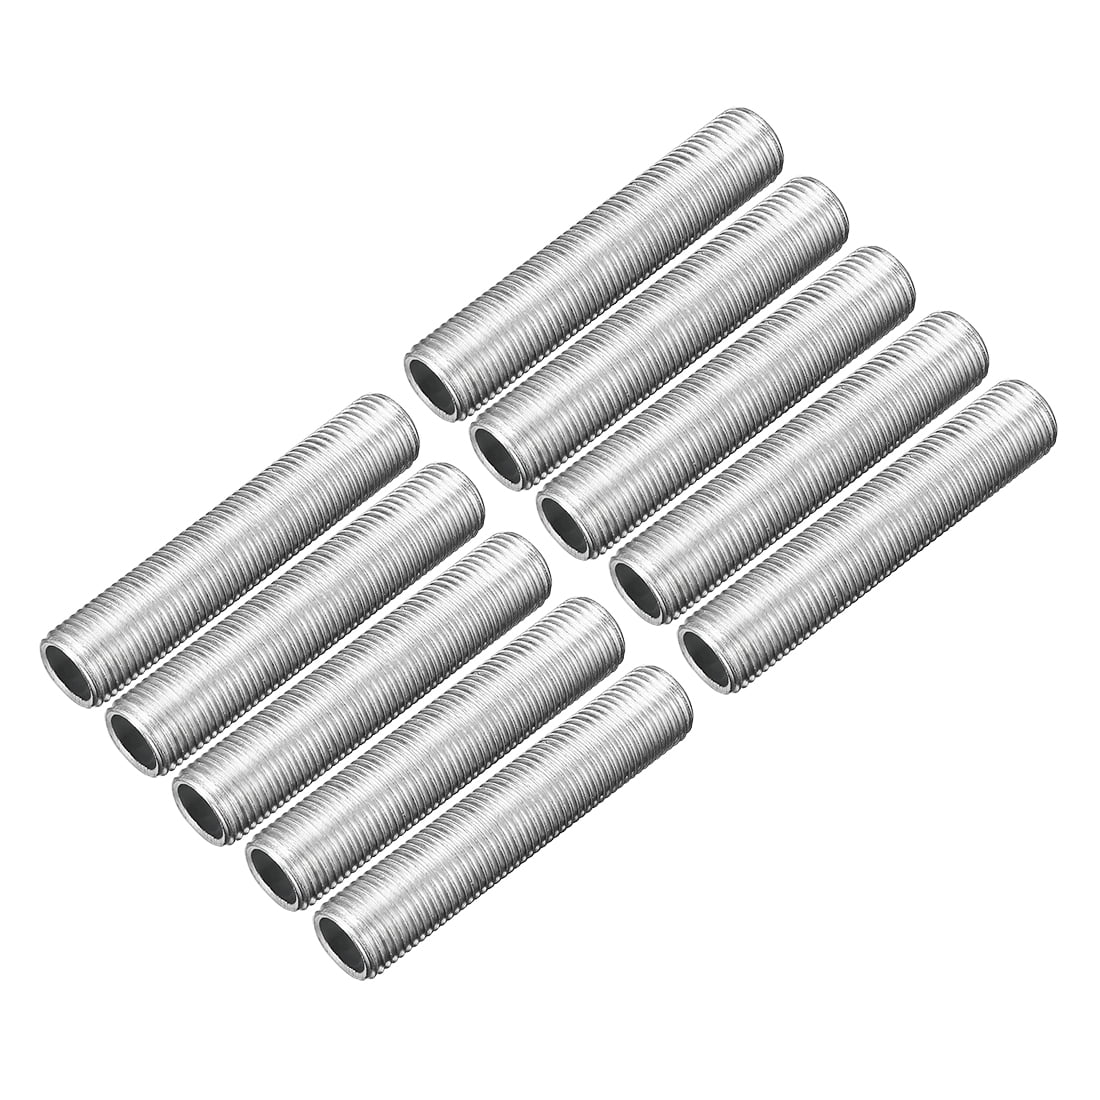 5x M10 1mm fine Pitch Threaded Aluminum rod Nipple hollow tube in various length 